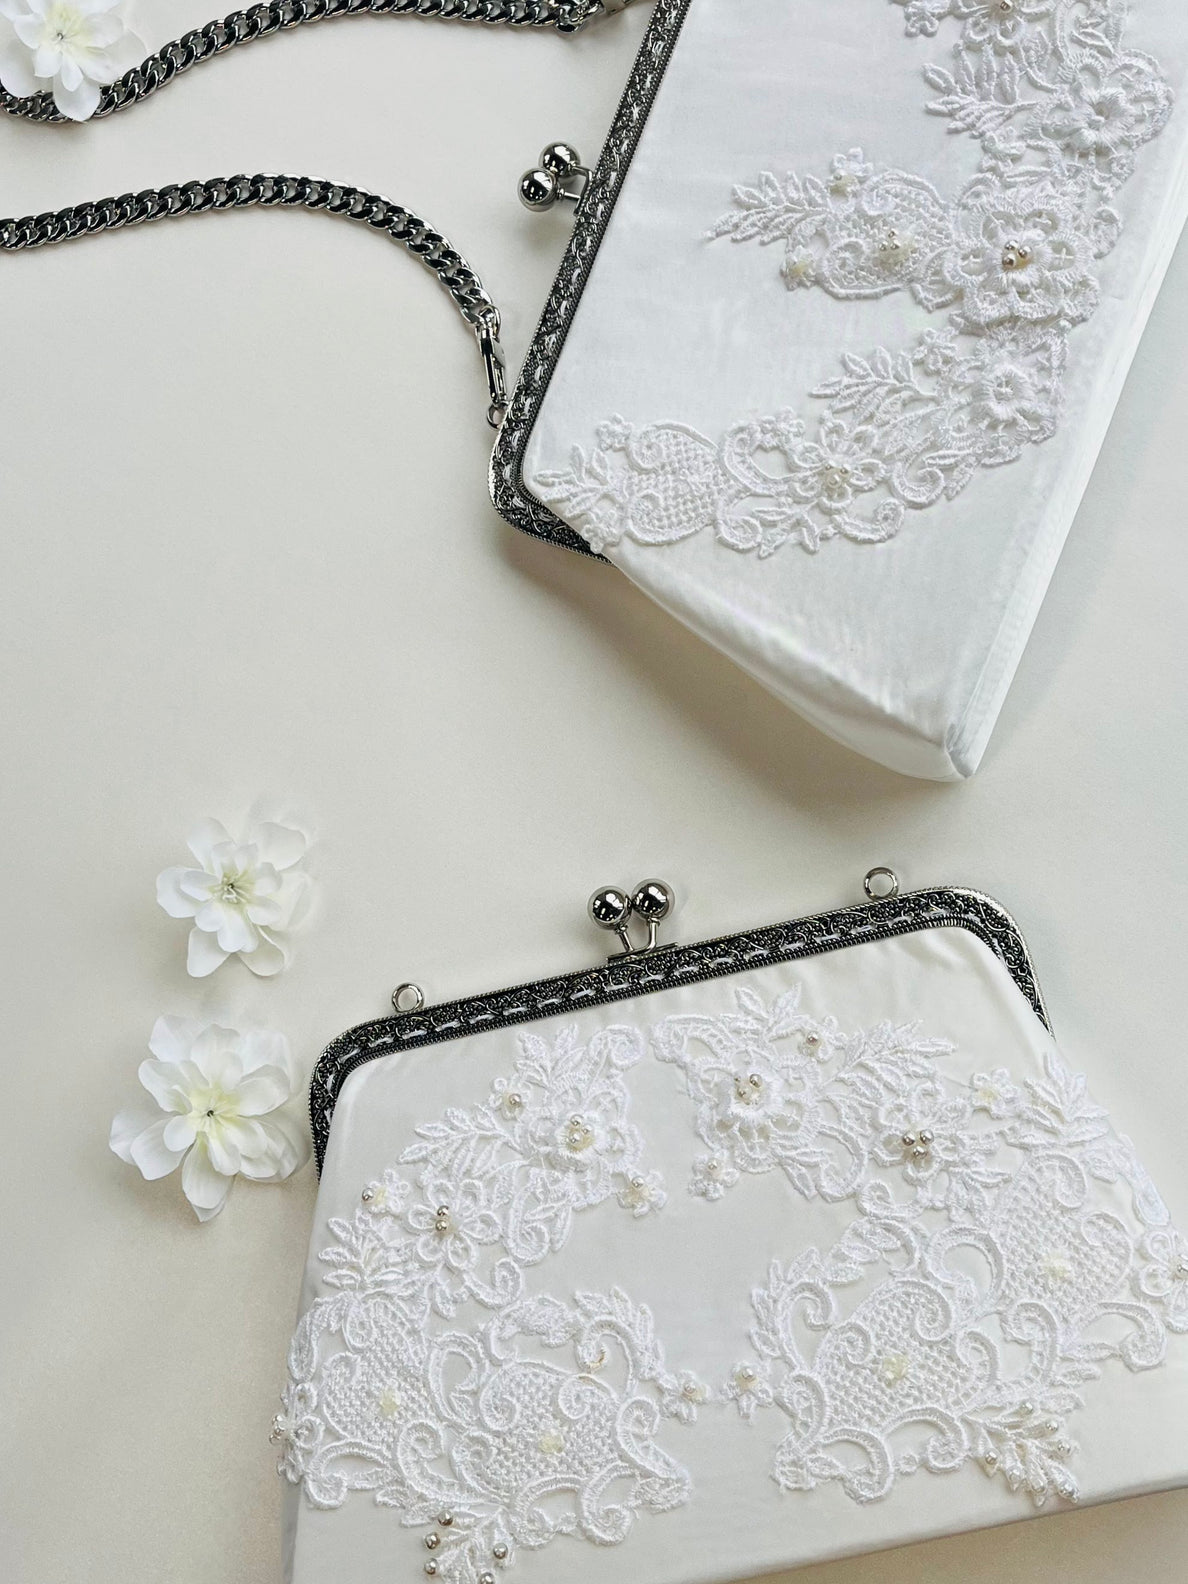 Clutch Bags for Weddings